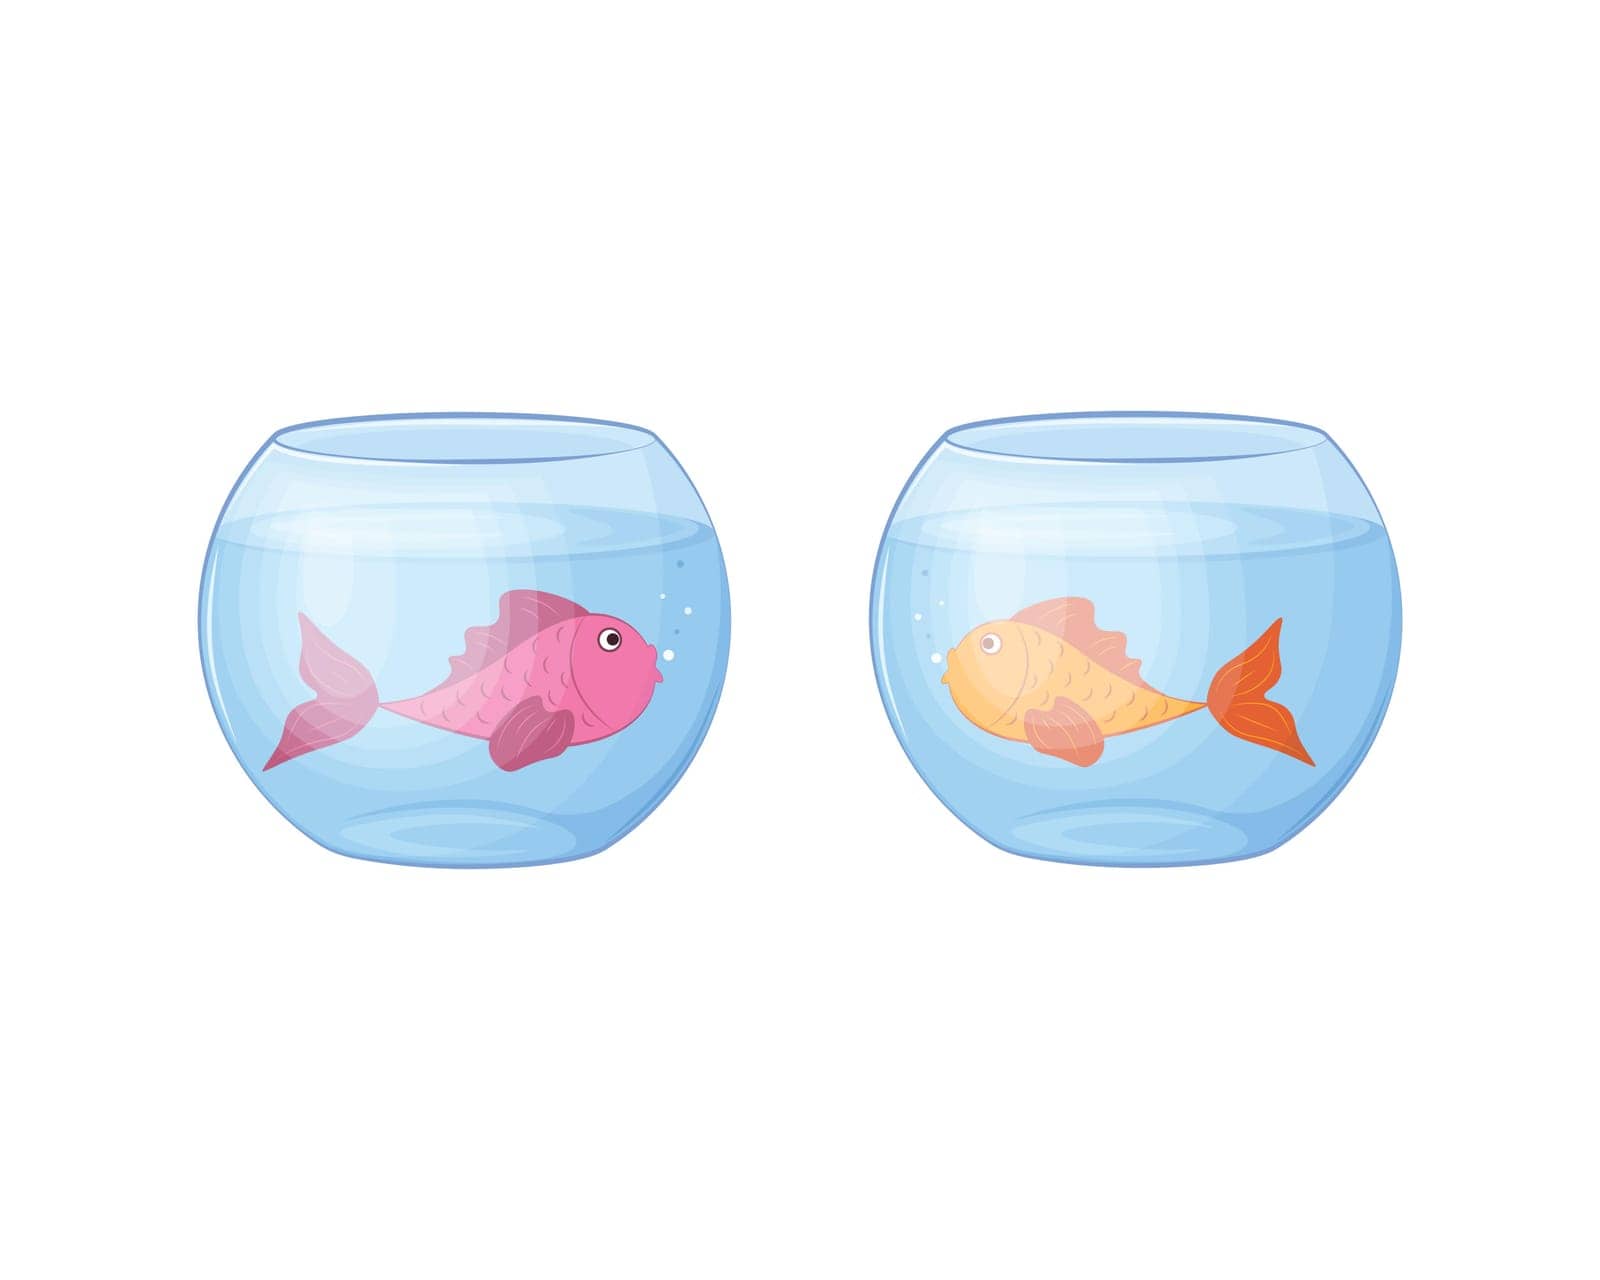 Fish in the aquarium. Two fish in aquariums. Pink and gold fish in a round aquarium. Vector illustration isolated on a white background.